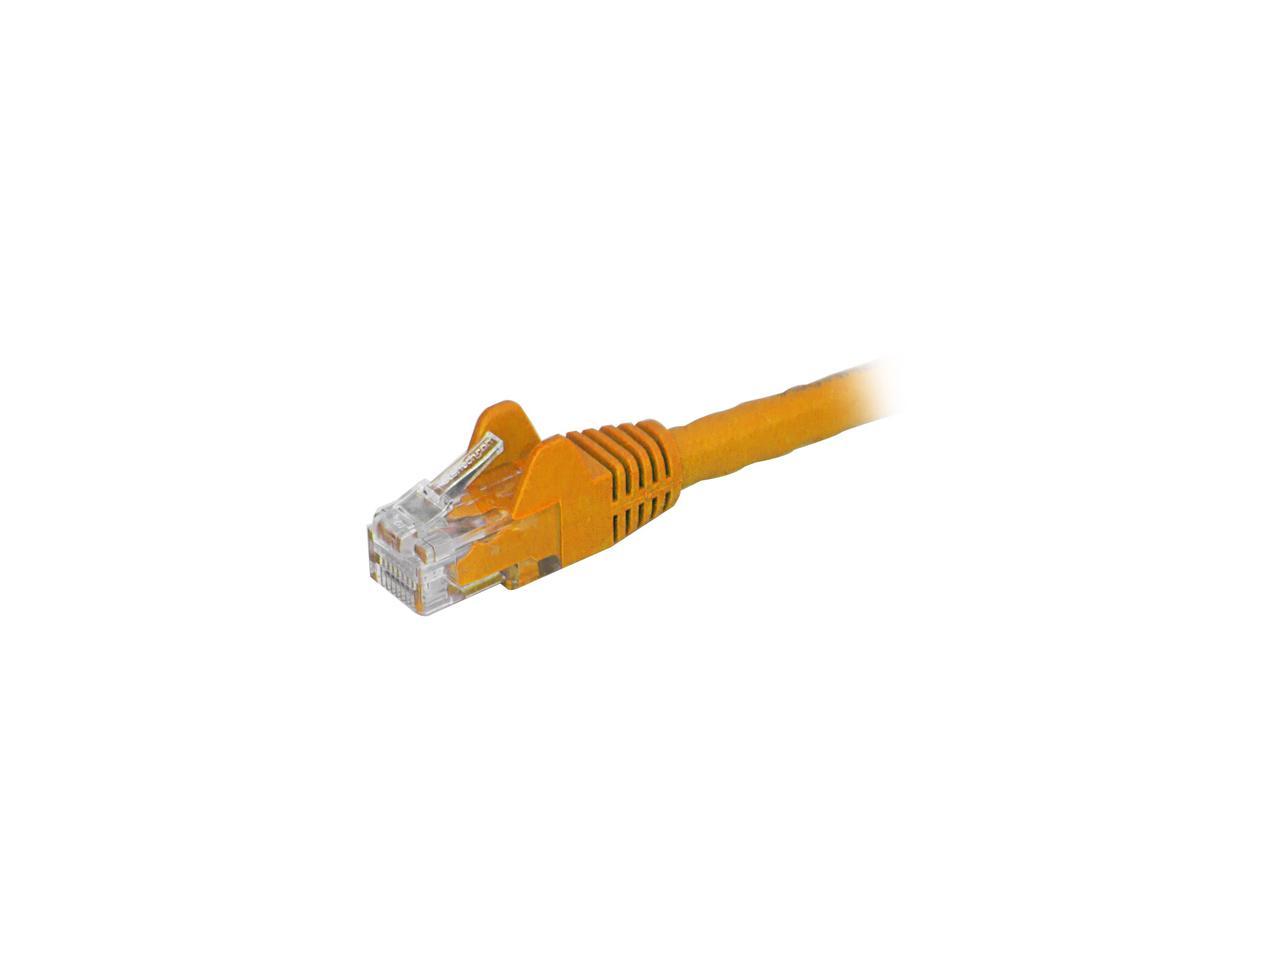 StarTech.com N6PATCH150OR 150 ft. Cat 6 Orange Cat 6 Cables - image 2 of 2